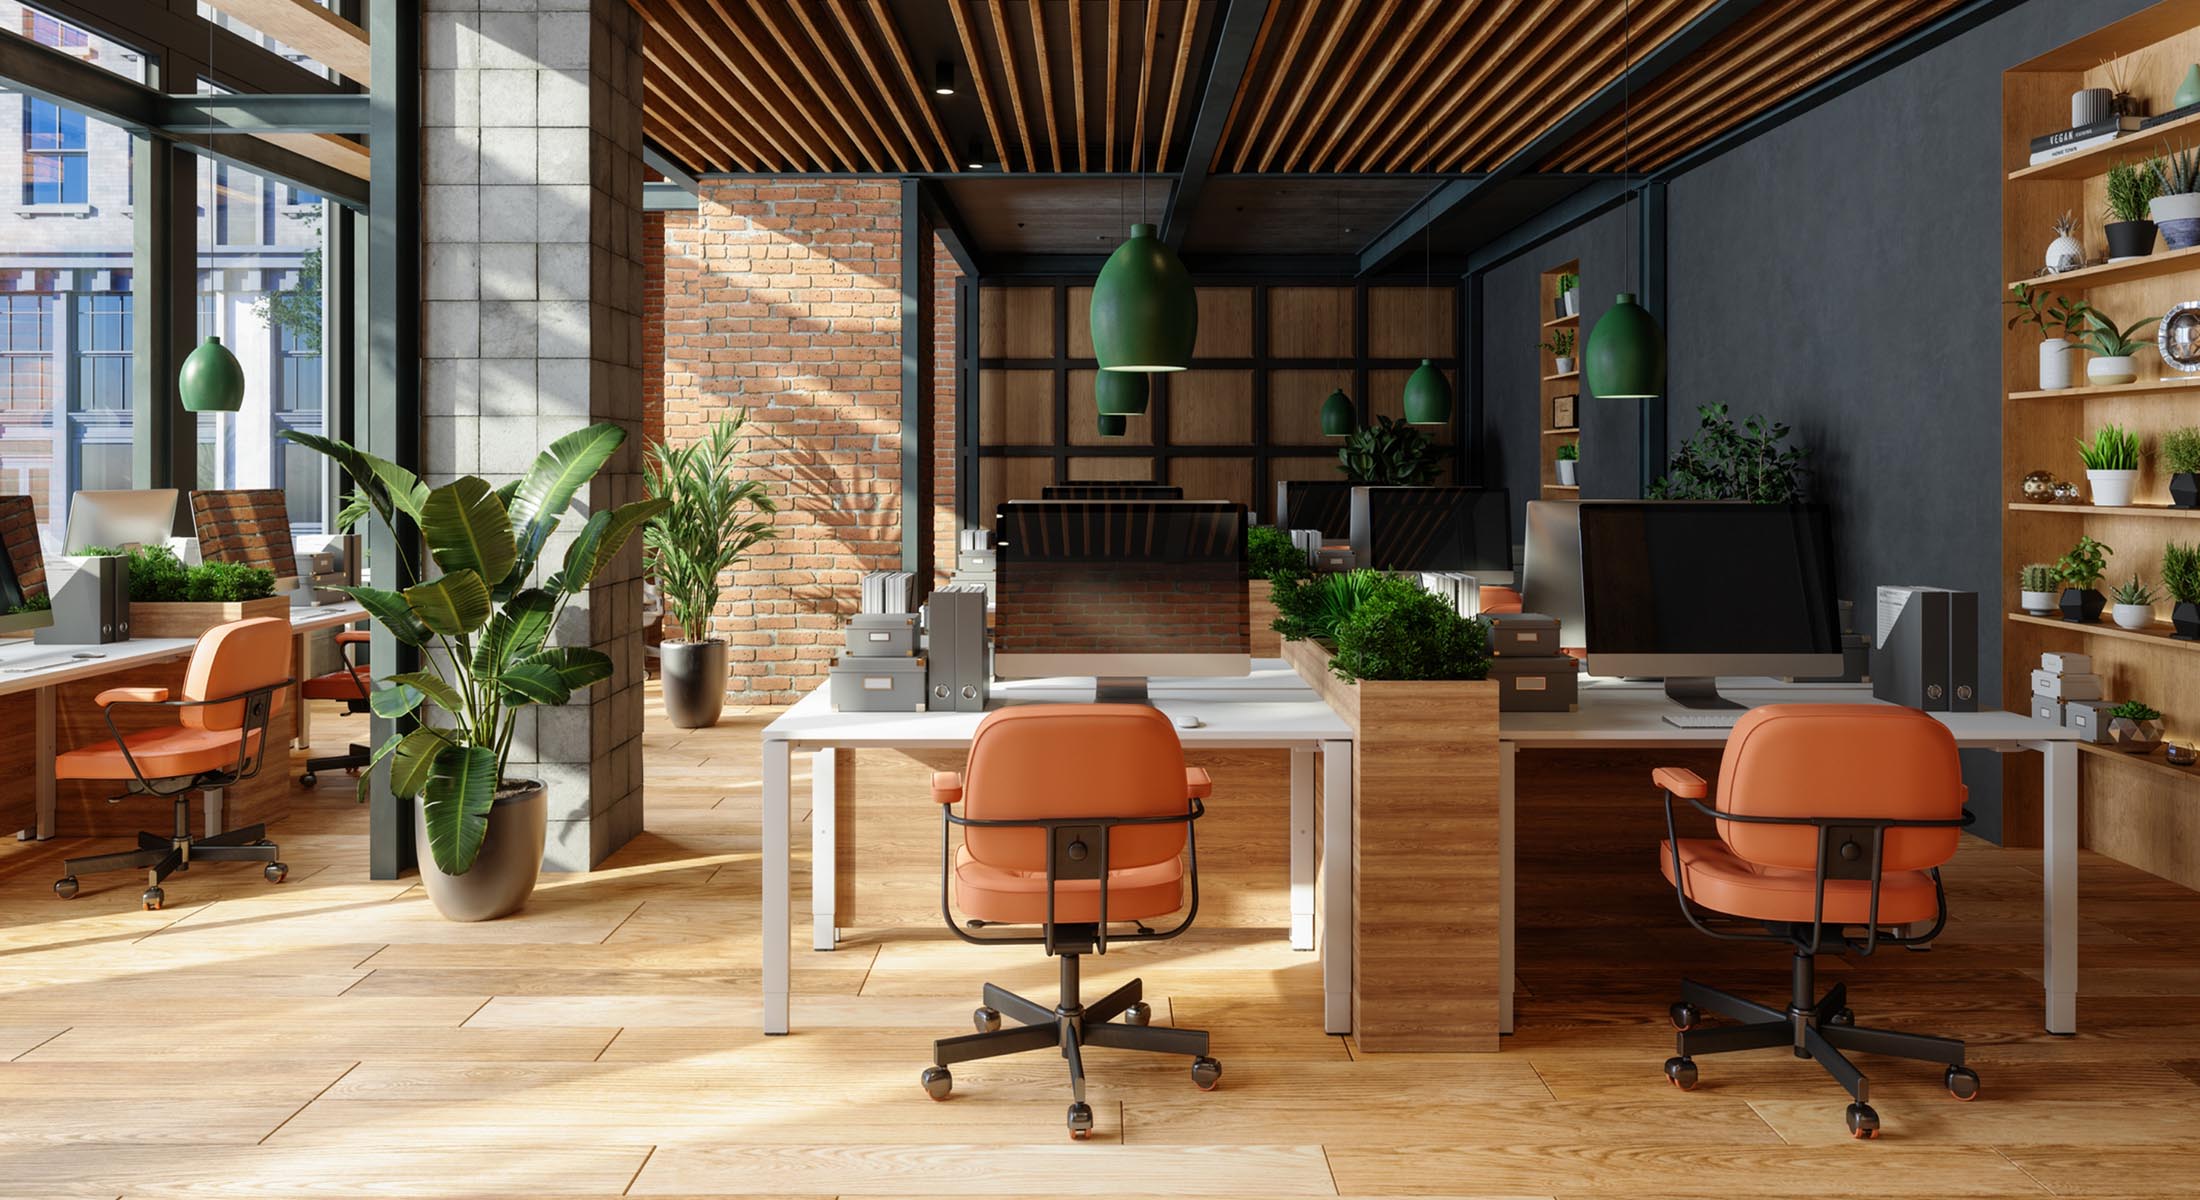 A modern office space with brick walls, plants, iMac computers and orange desk chairs